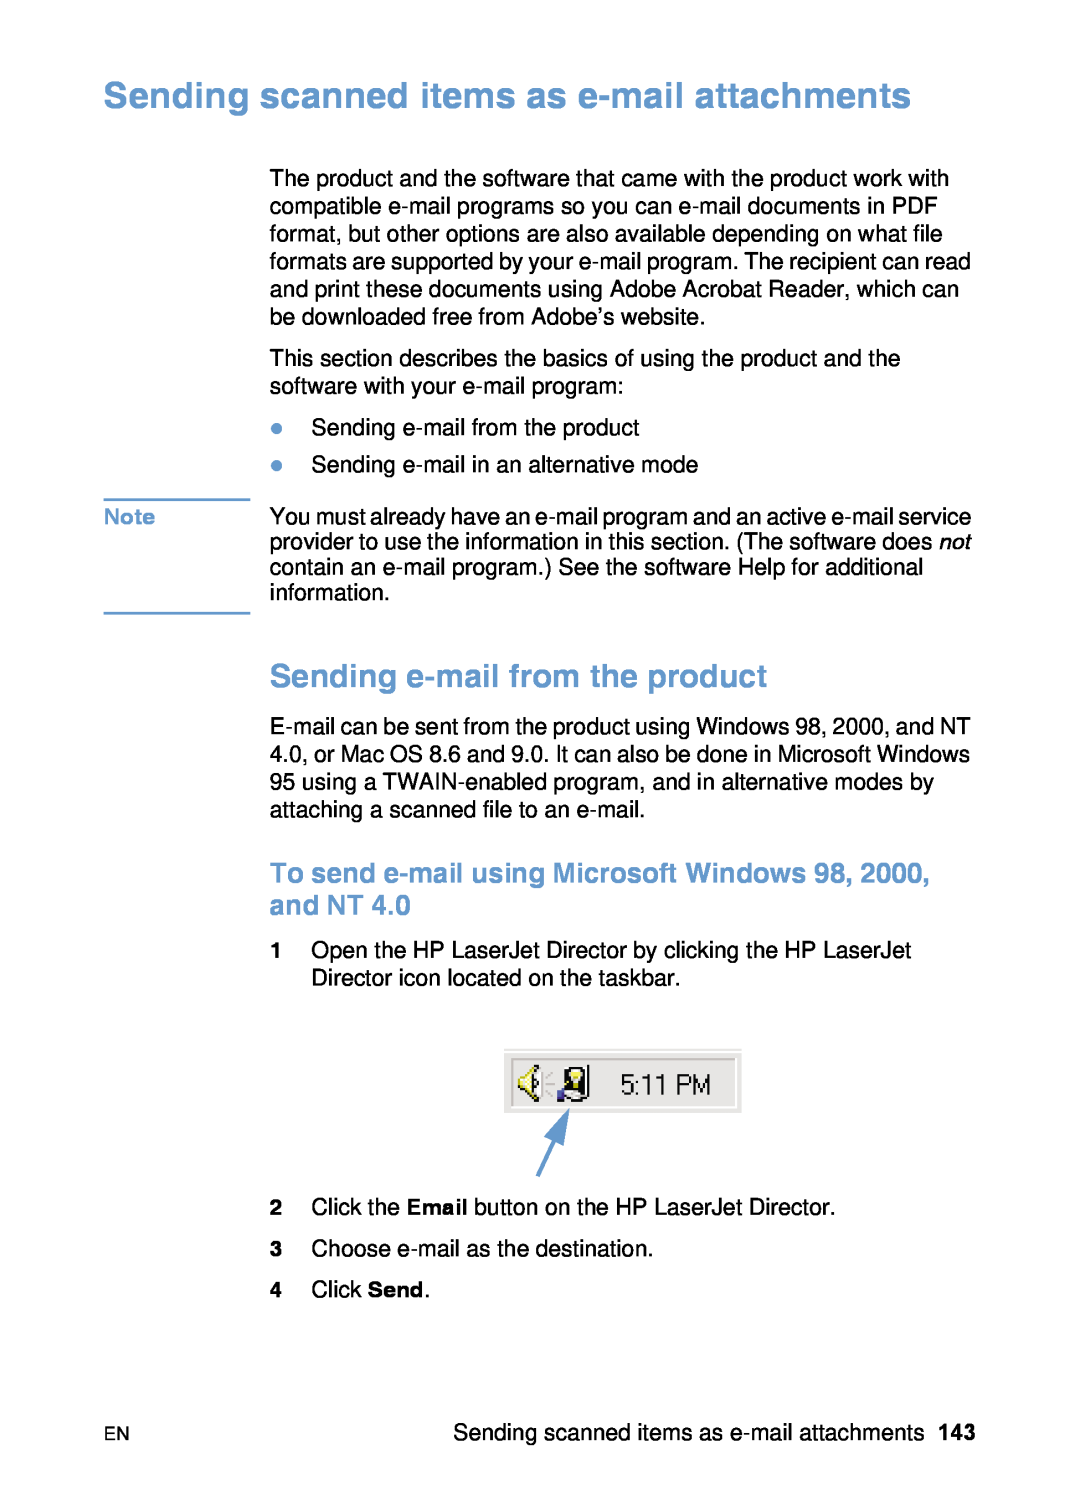 HP 3200 manual Sending scanned items as e-mail attachments, Sending e-mail from the product 